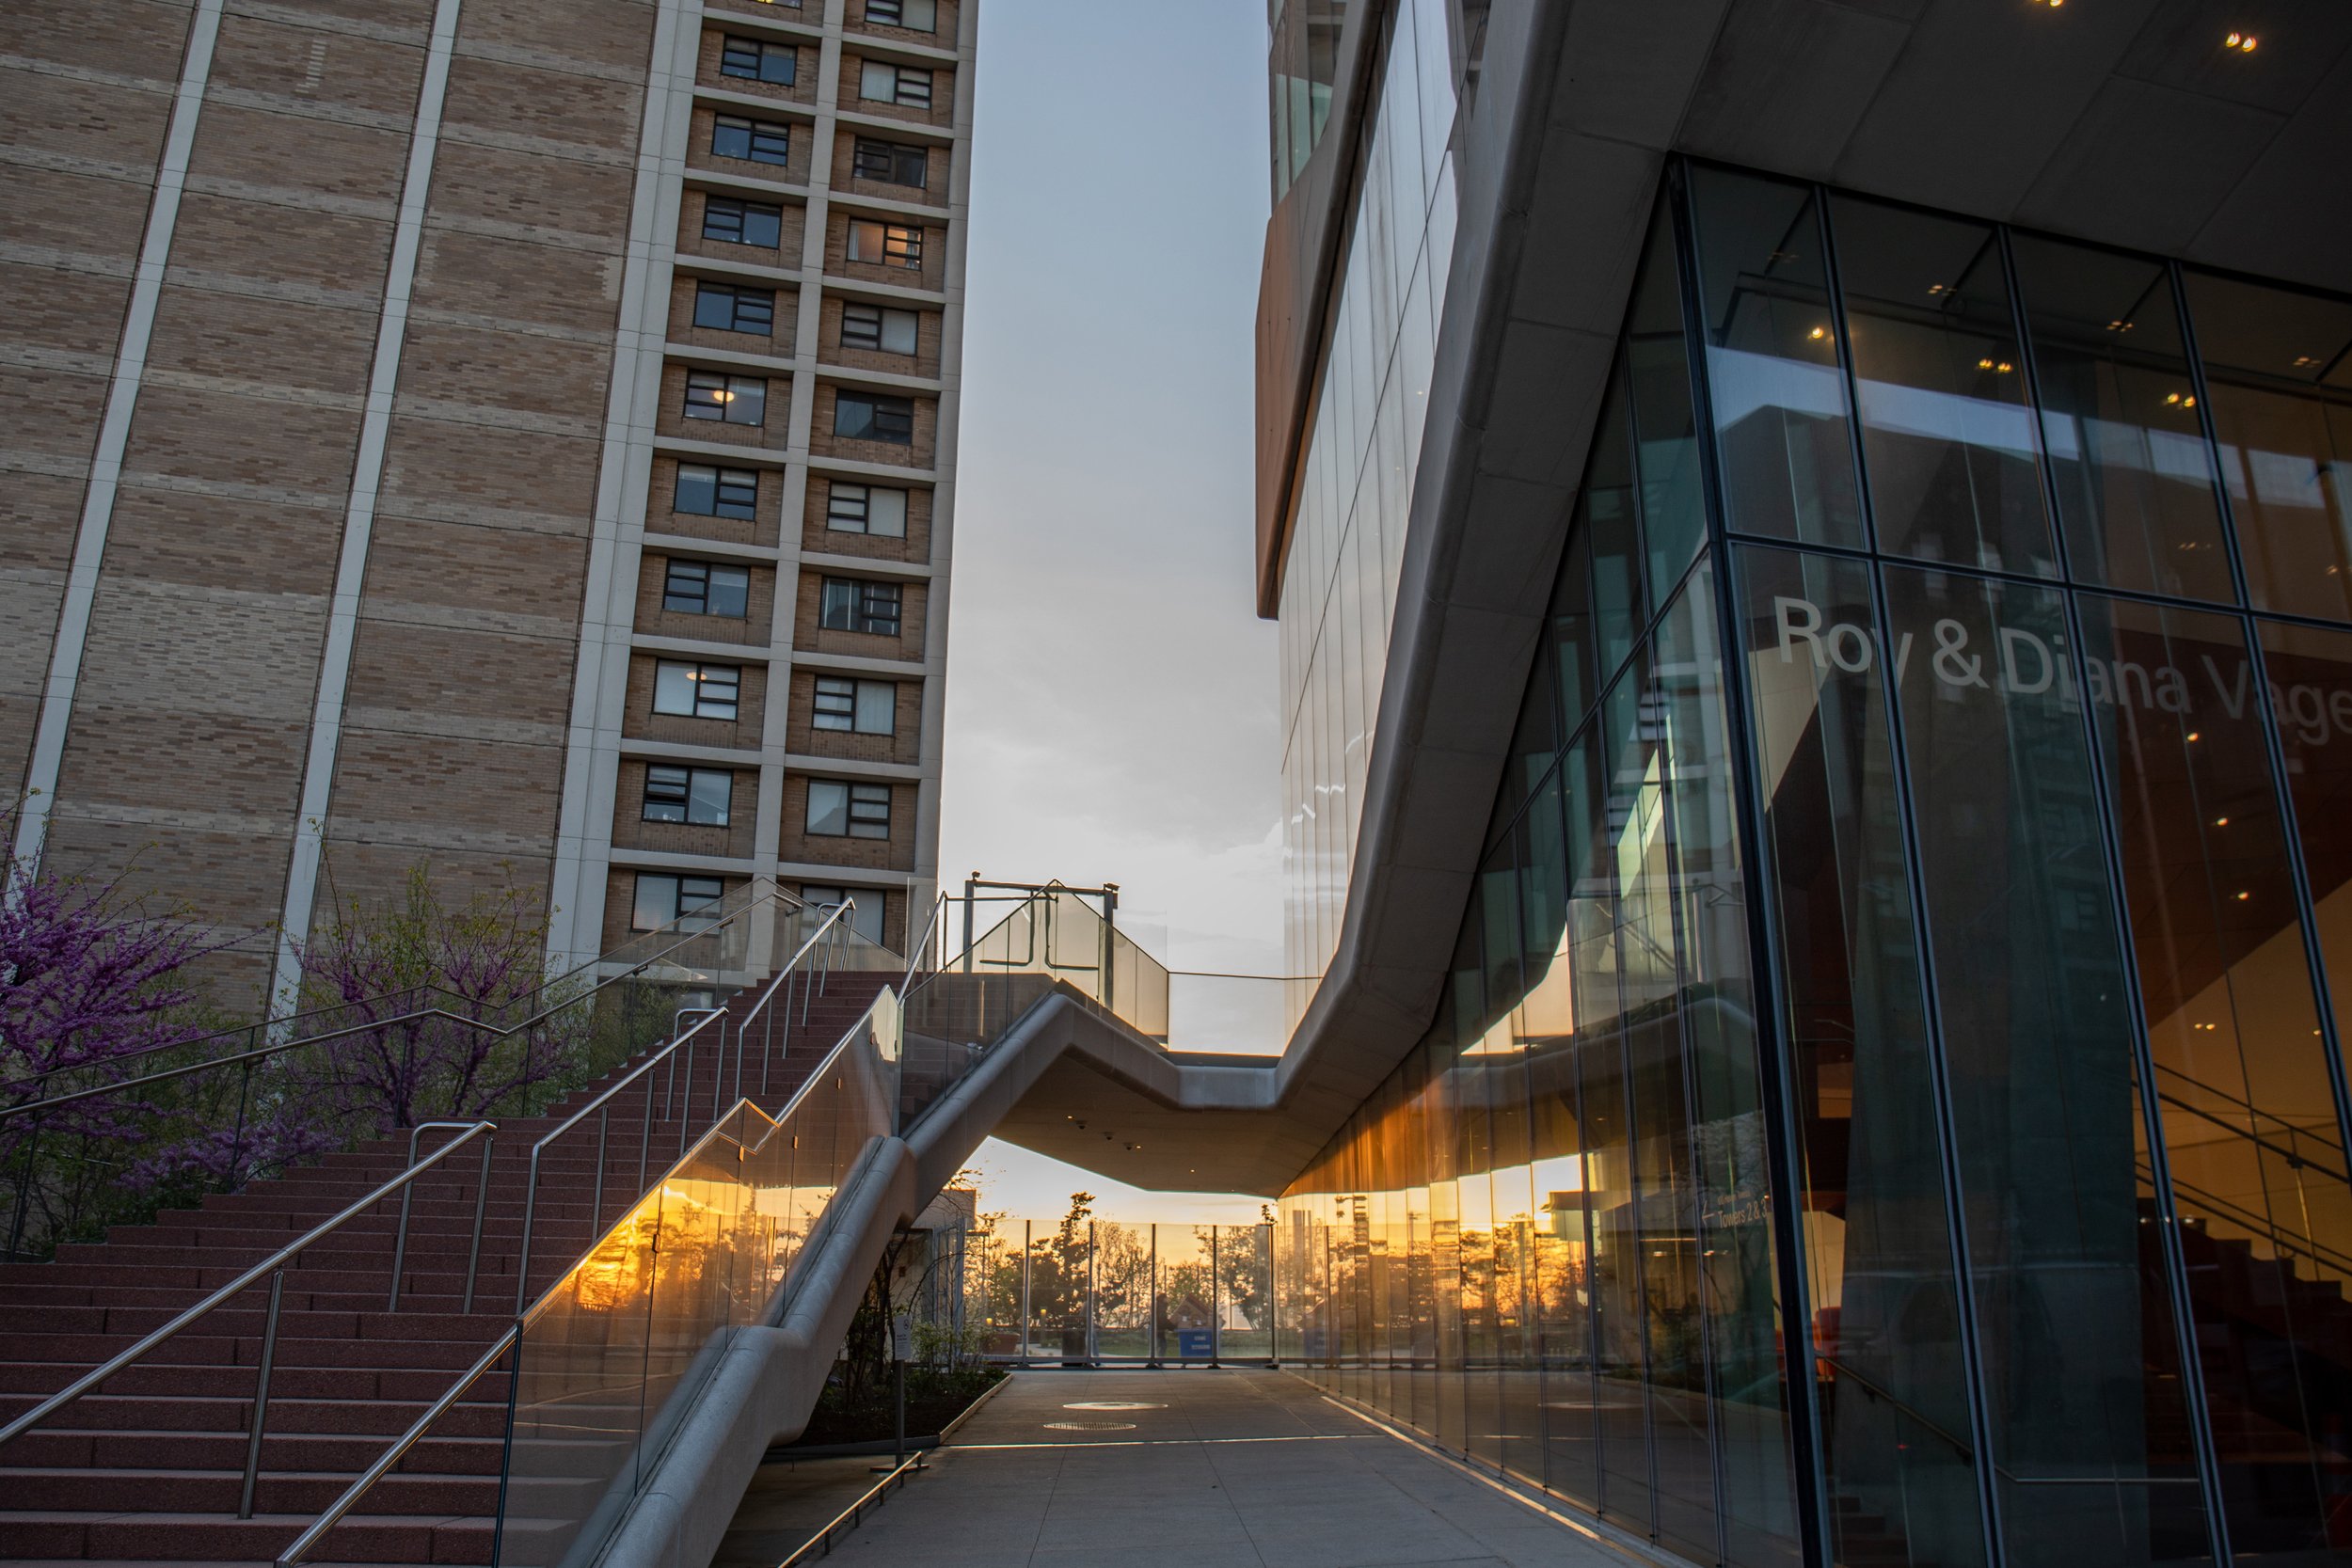  The Roy and Diana Vagelos Education Center at Columbia University on the evening of April 20, 2023. The center is a medical and graduate education building where the anatomical donor ceremony is held. The ceremony aims to thank and honor the donors 